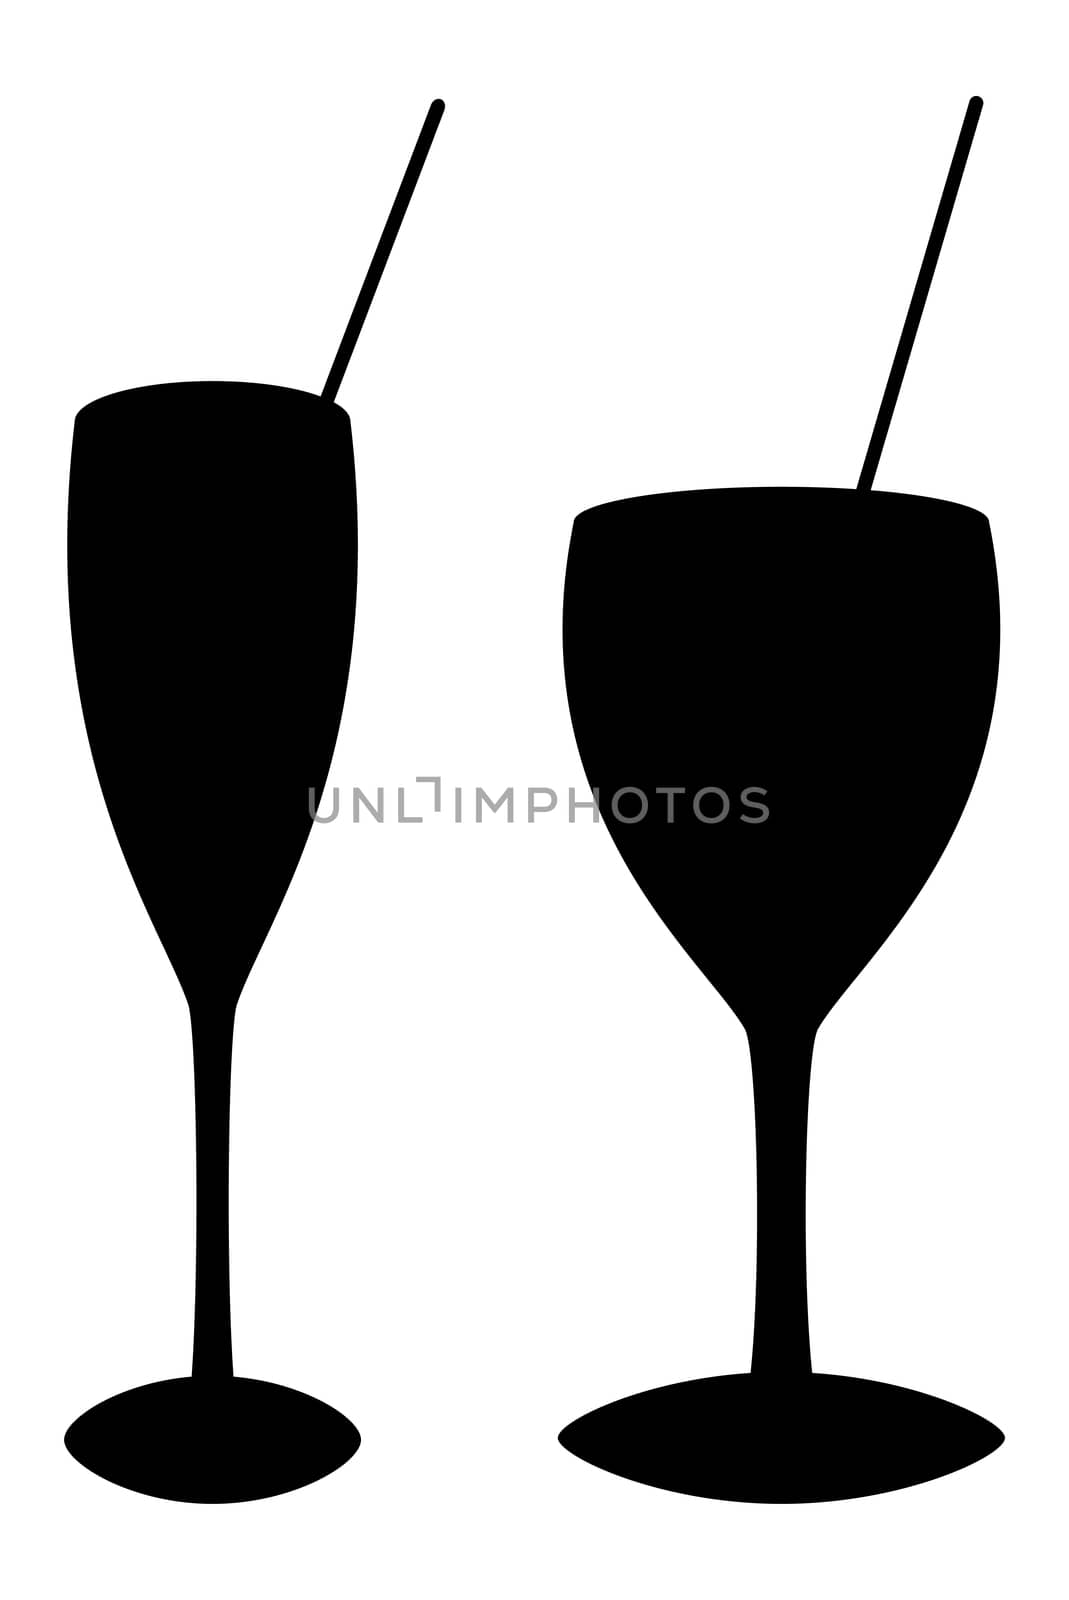 Glasses of wine, black silhouette on a white background.